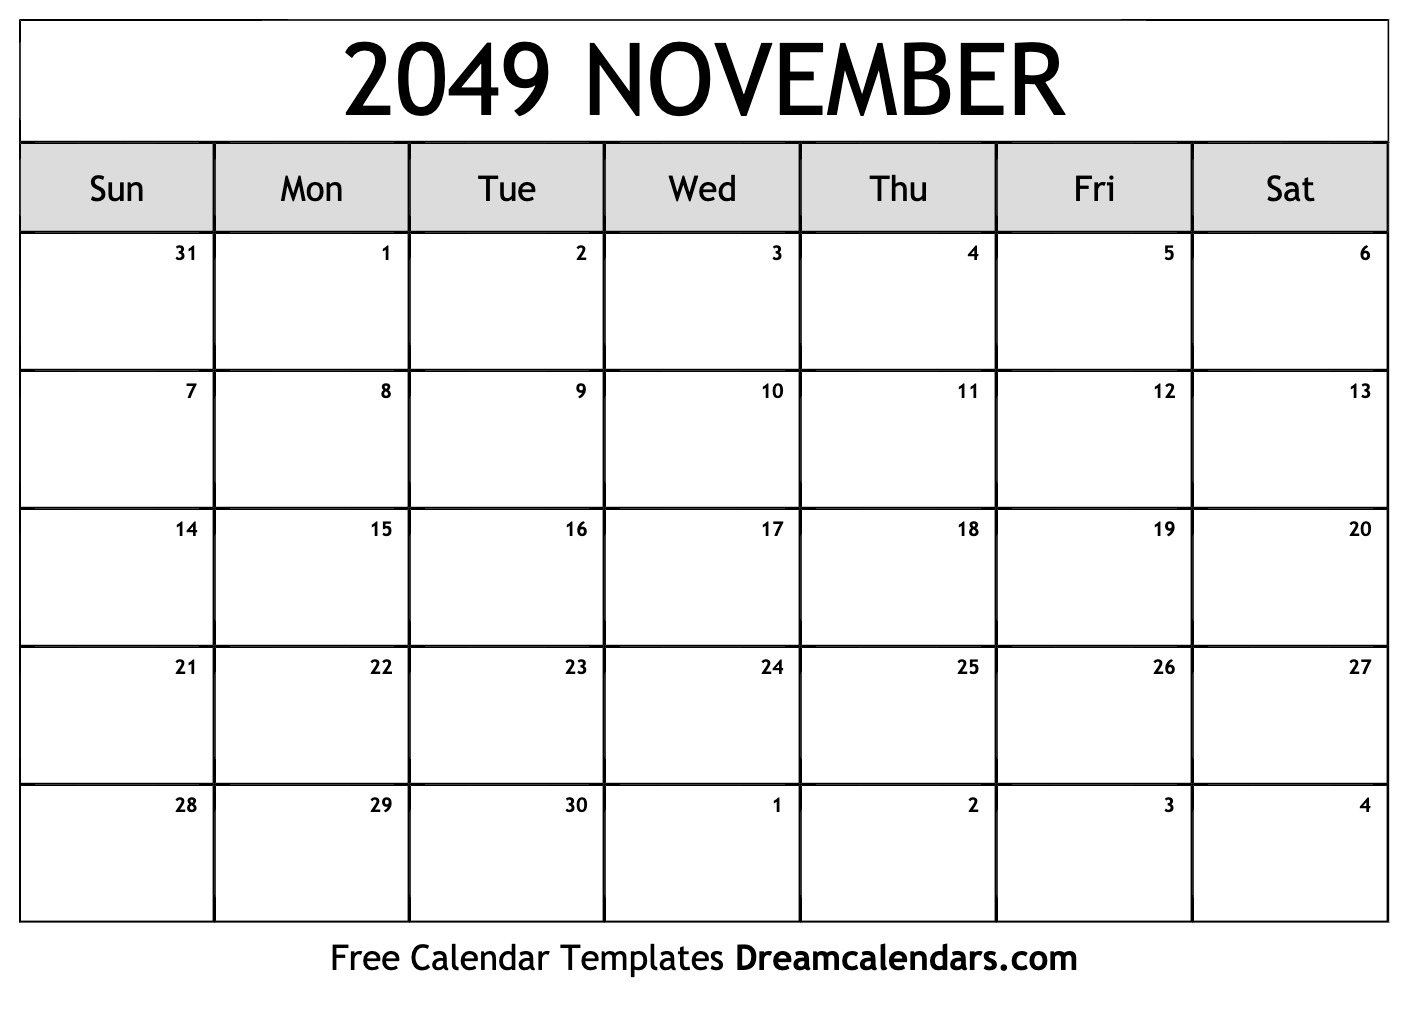 November 2049 Calendar Free Printable With Holidays And Observances